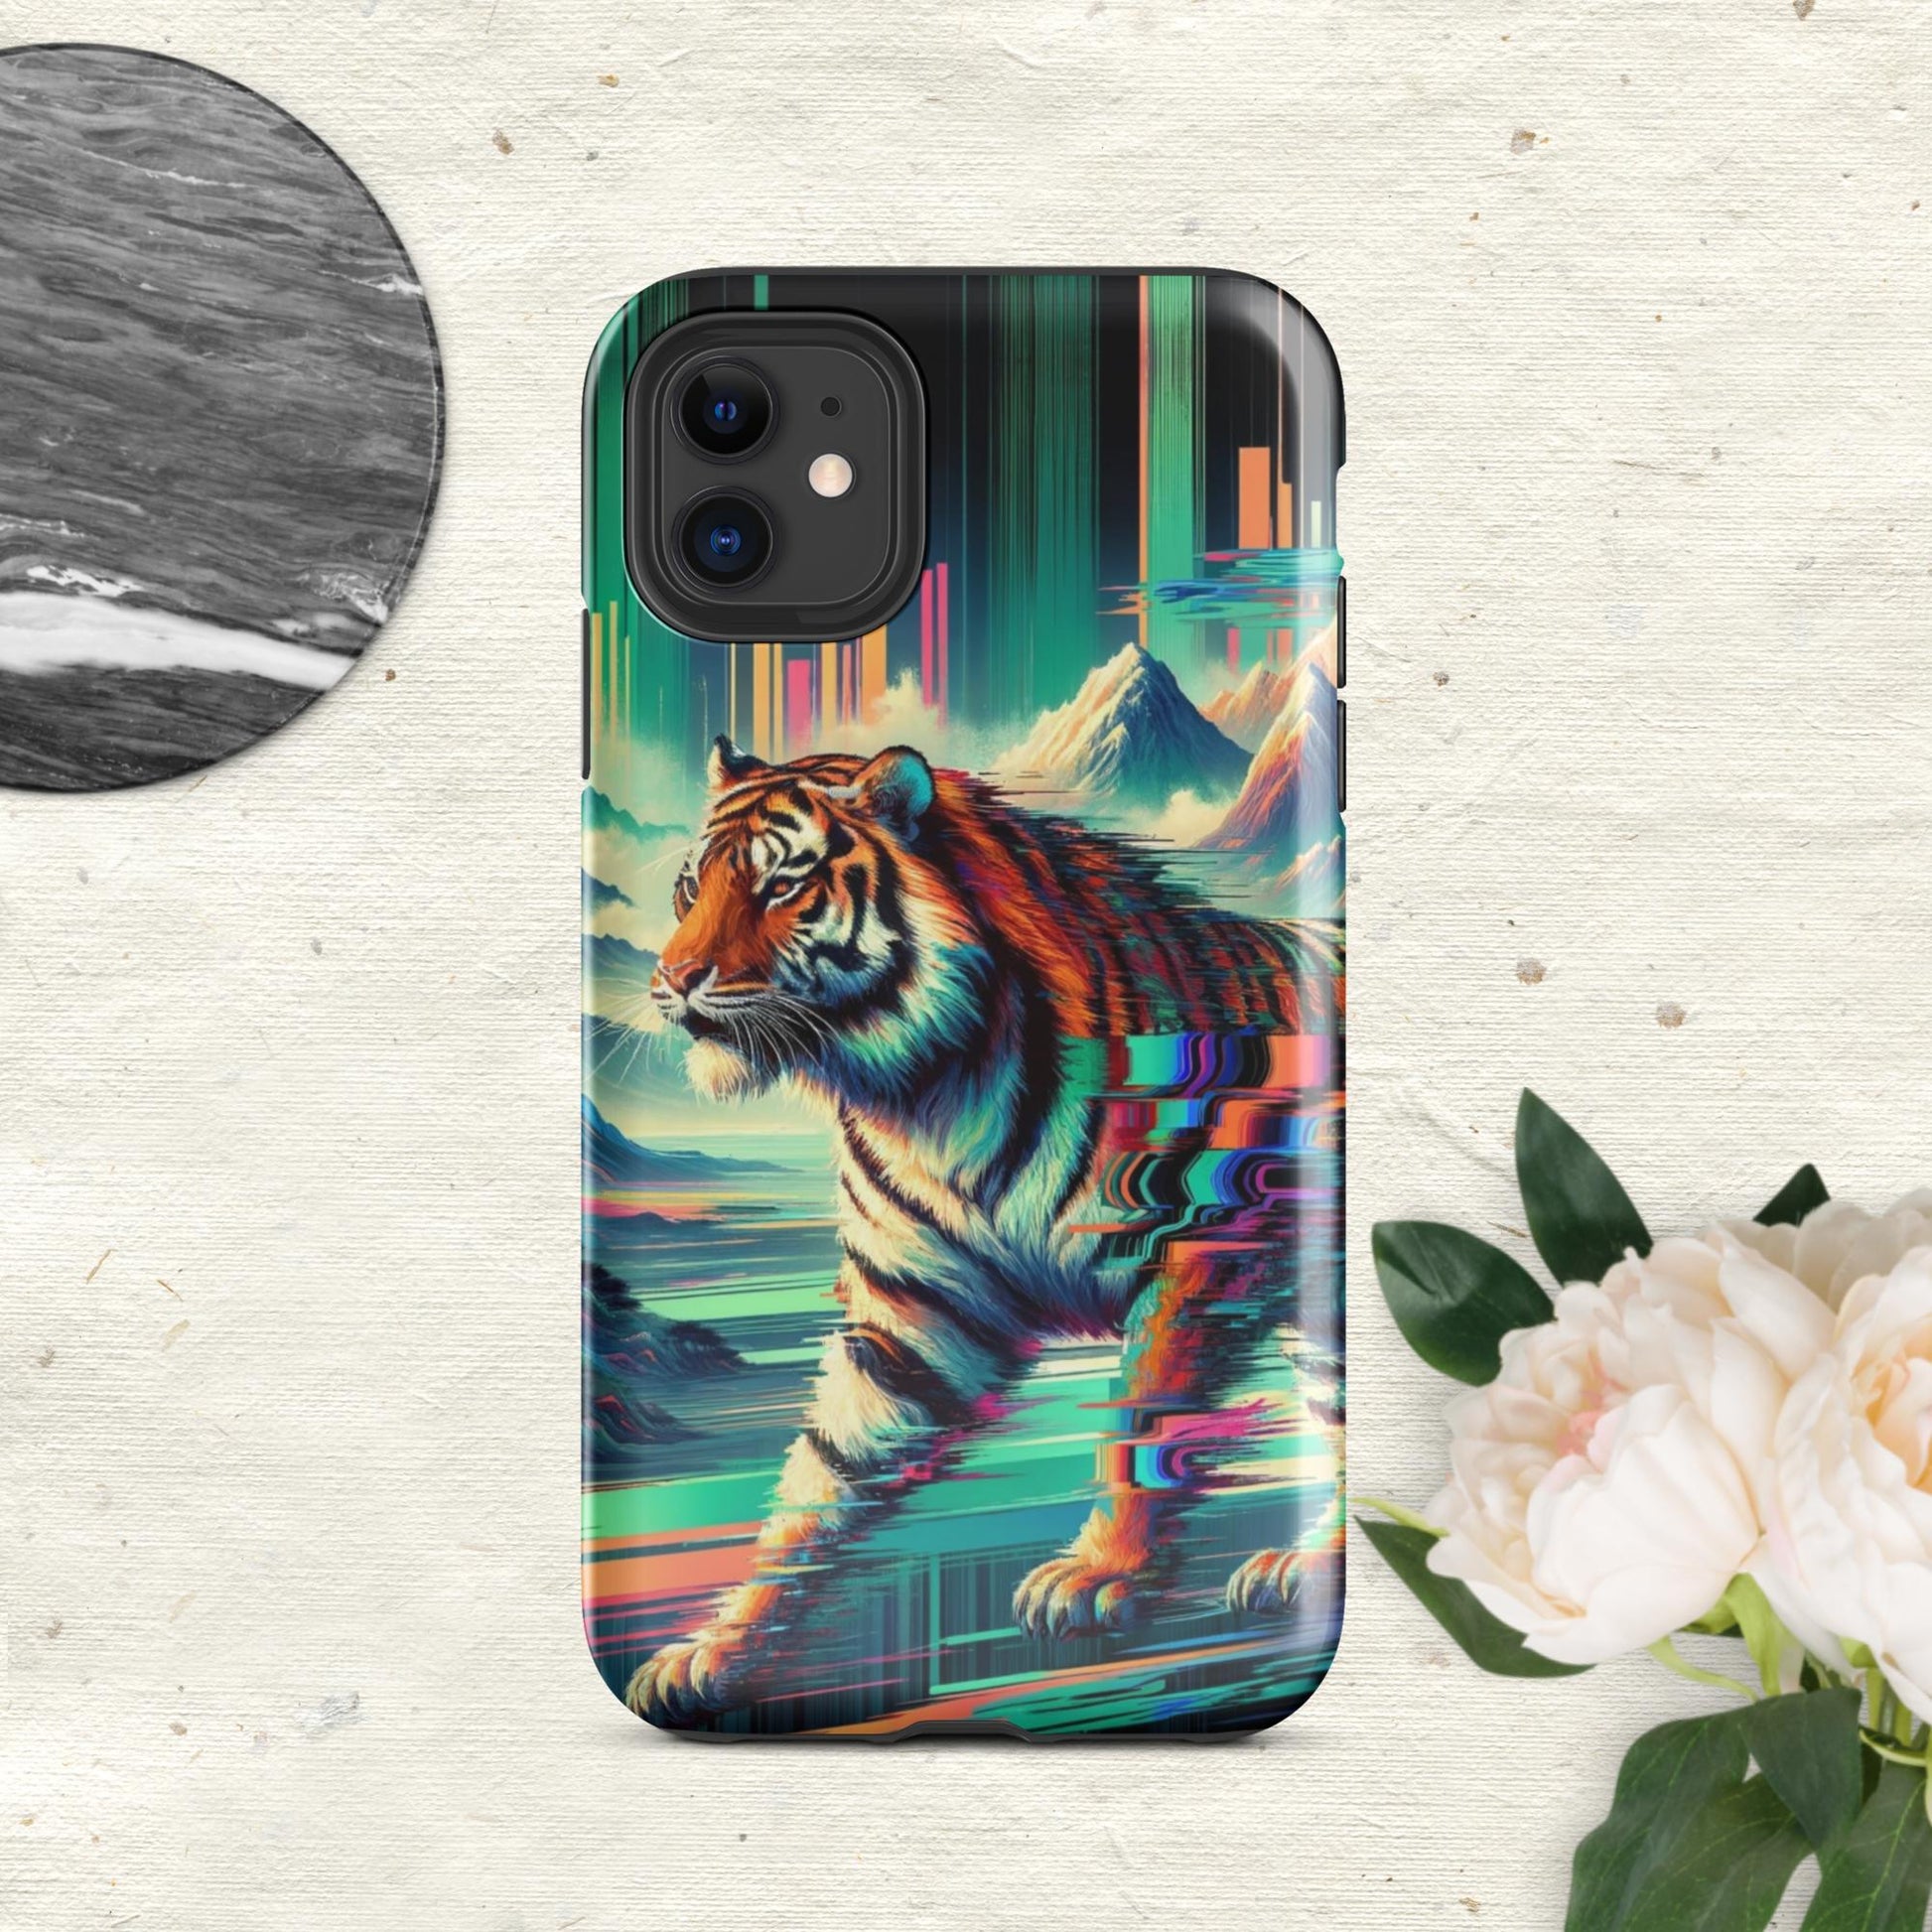 The Hologram Hook Up Glossy / iPhone 11 Tiger Glitch Tough Case for iPhone®